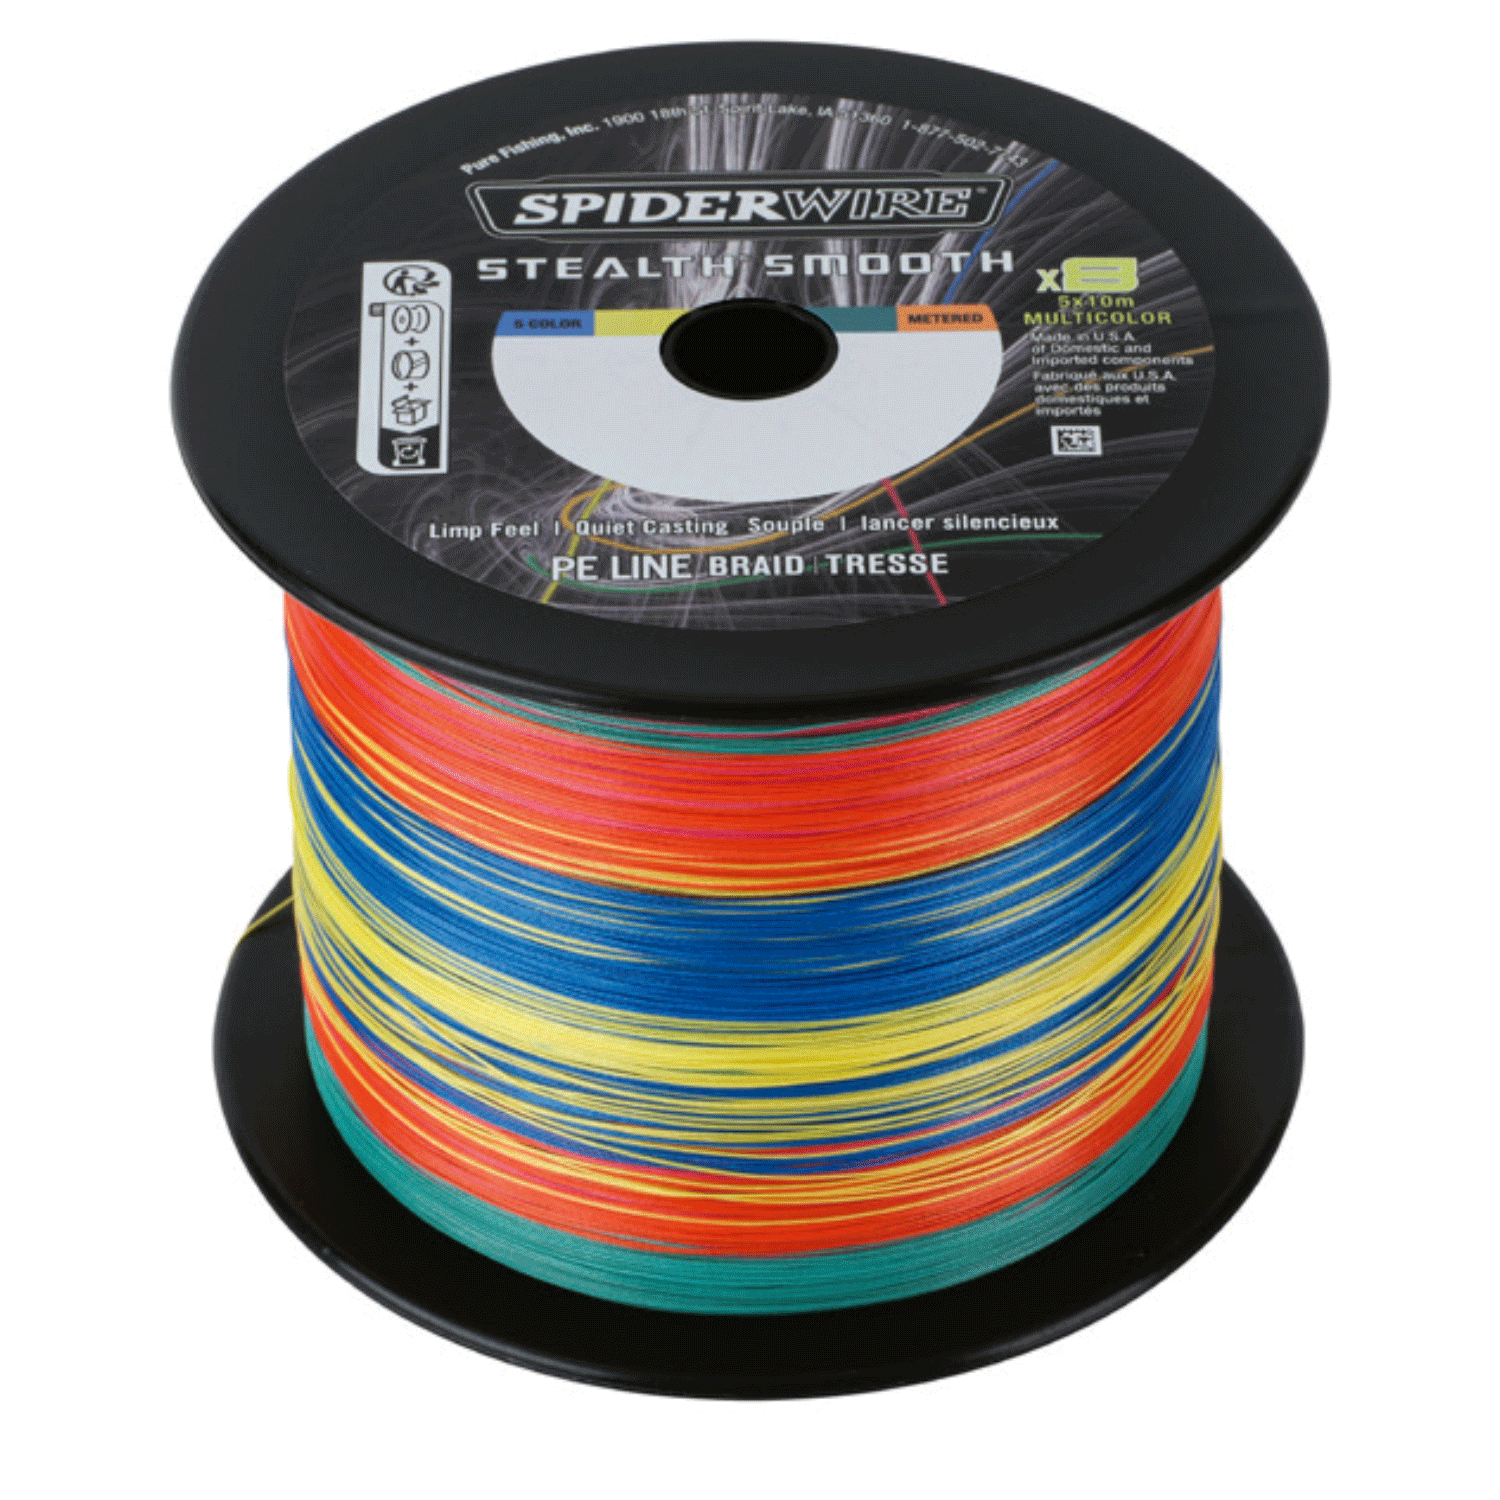 SpiderWire Stealth Smooth8 Braid - Multicolour 2000m : 46.3kg – Glasgow  Angling Centre